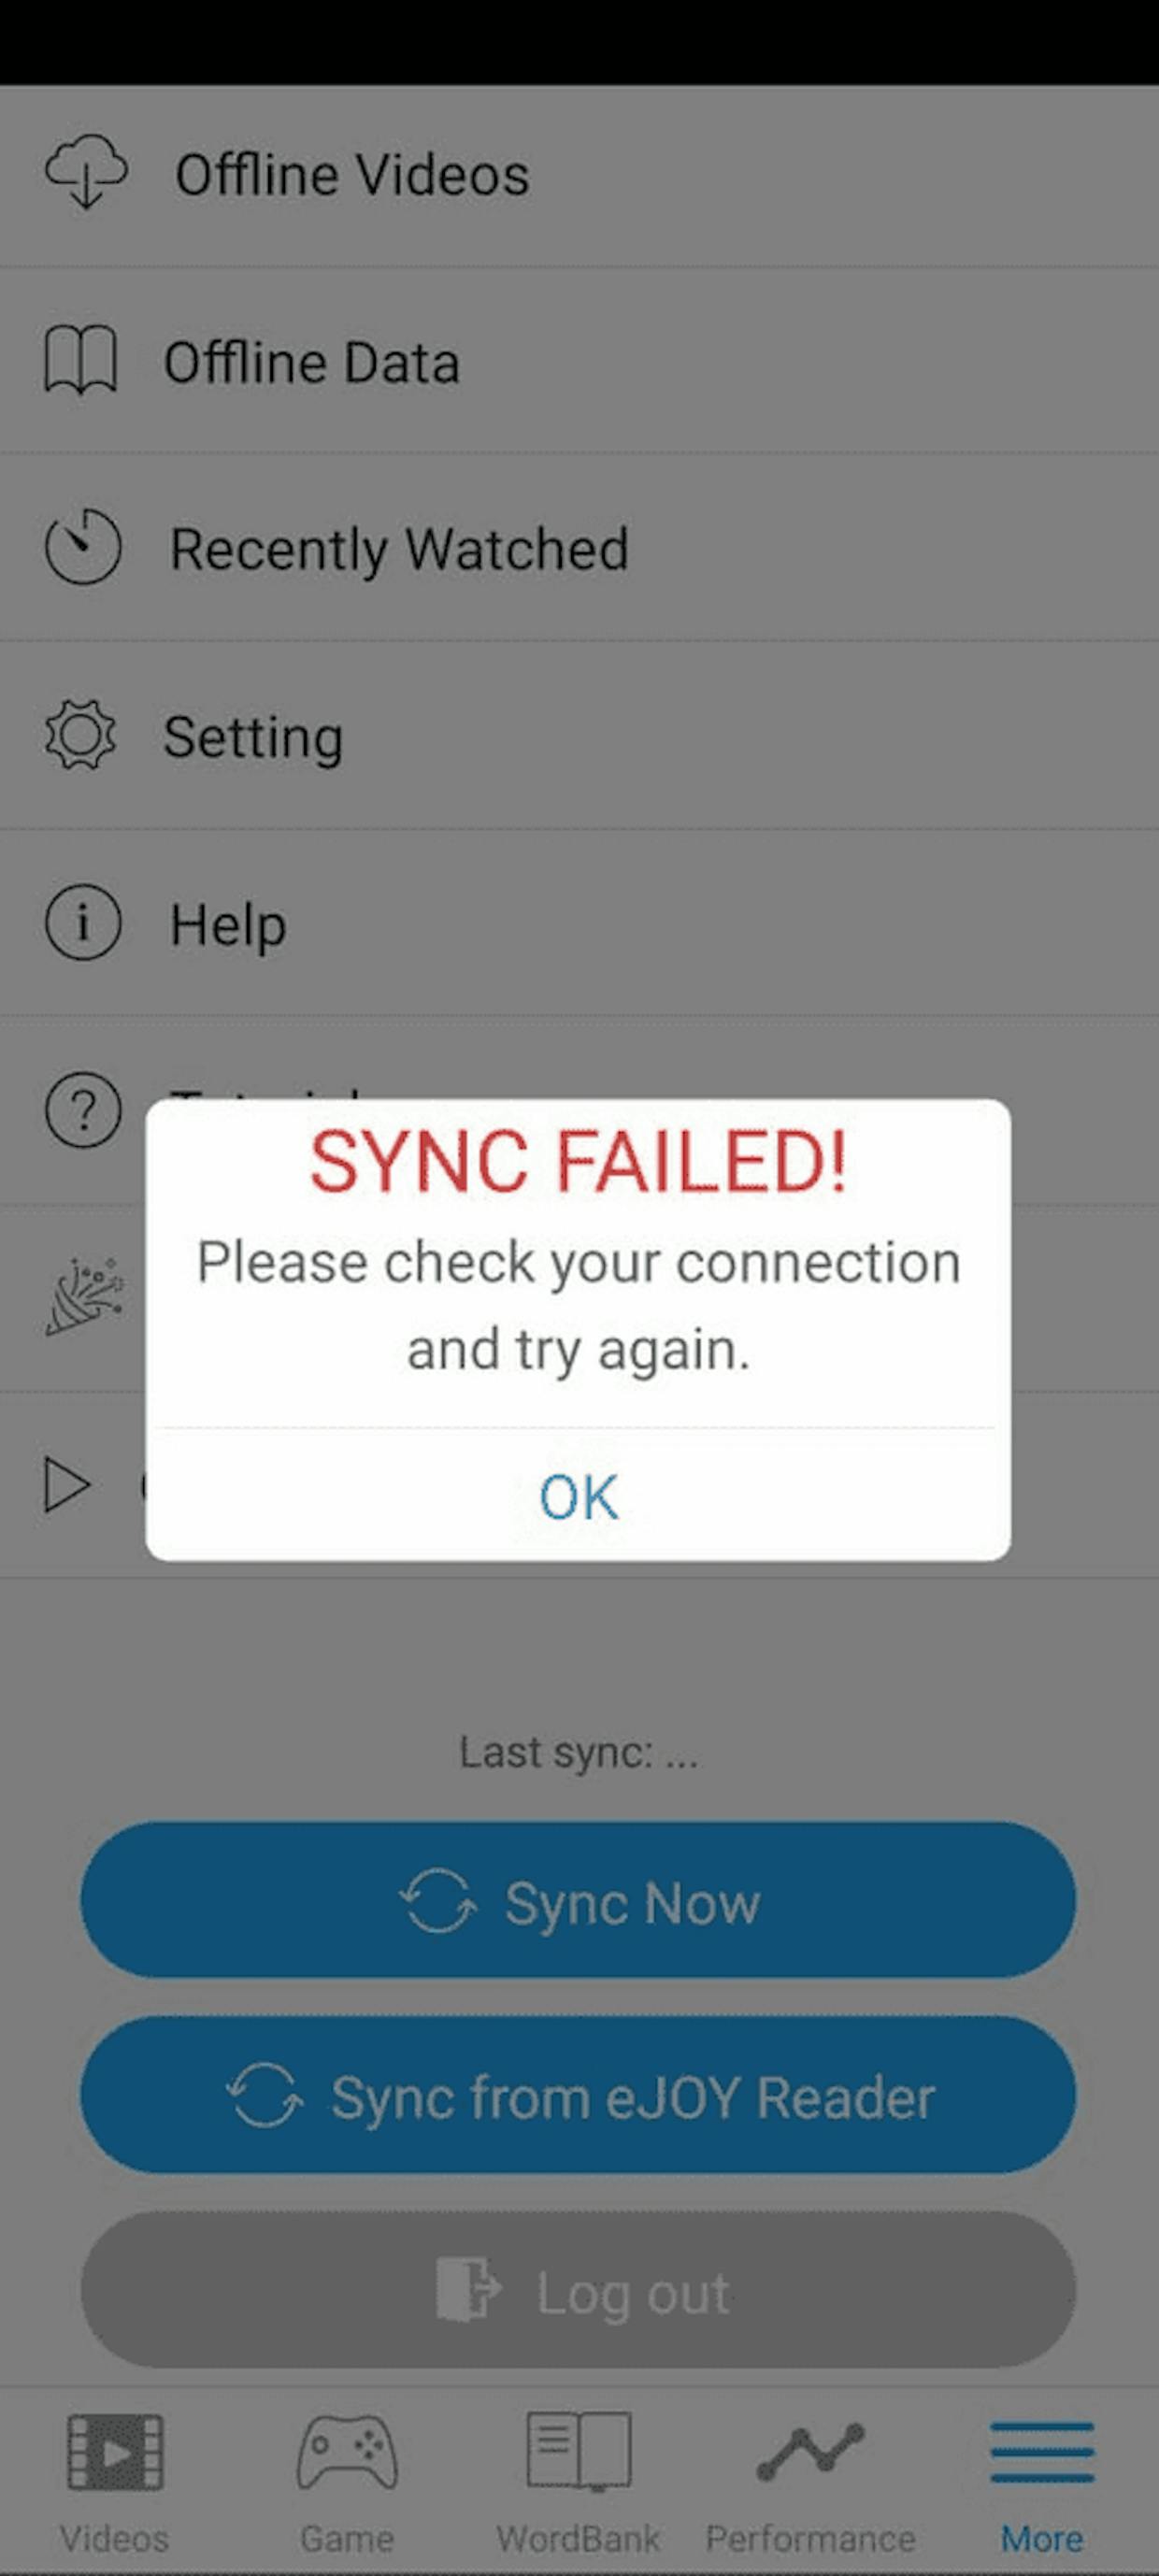 Most often the sync feature is not working these days.